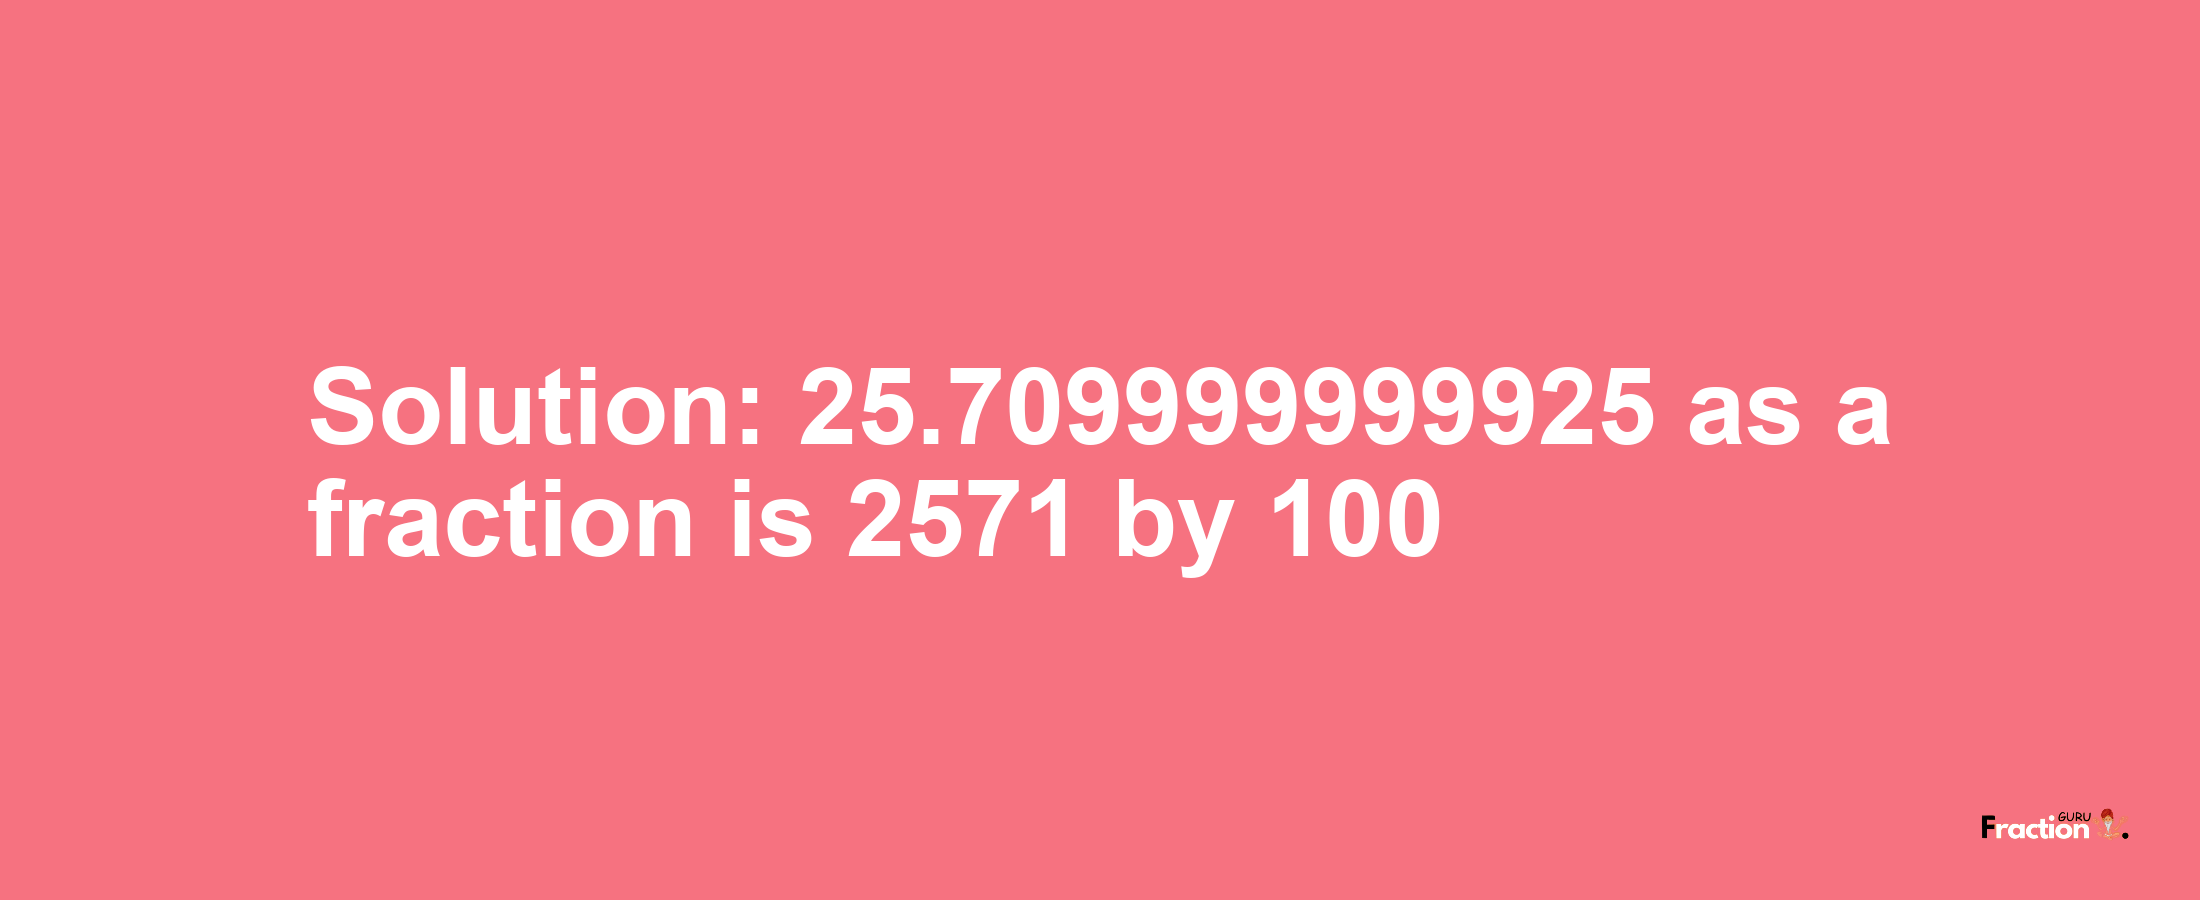 Solution:25.709999999925 as a fraction is 2571/100